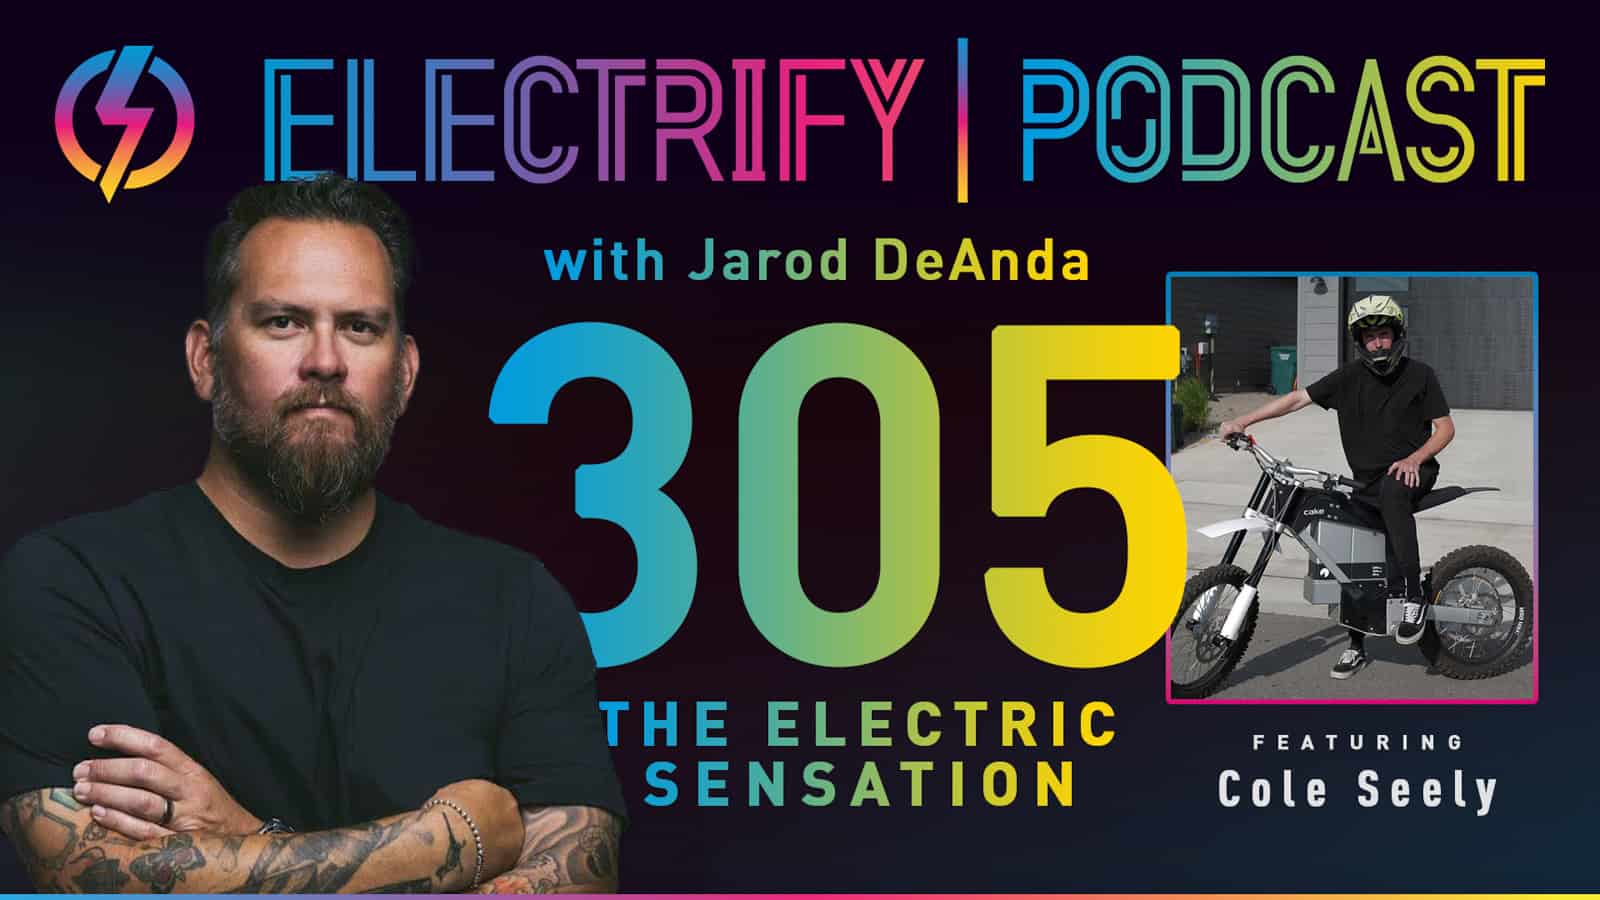 Image showcasing Electrify Podcast episode 305 with host Jarod DeAnda and guest Cole Seely